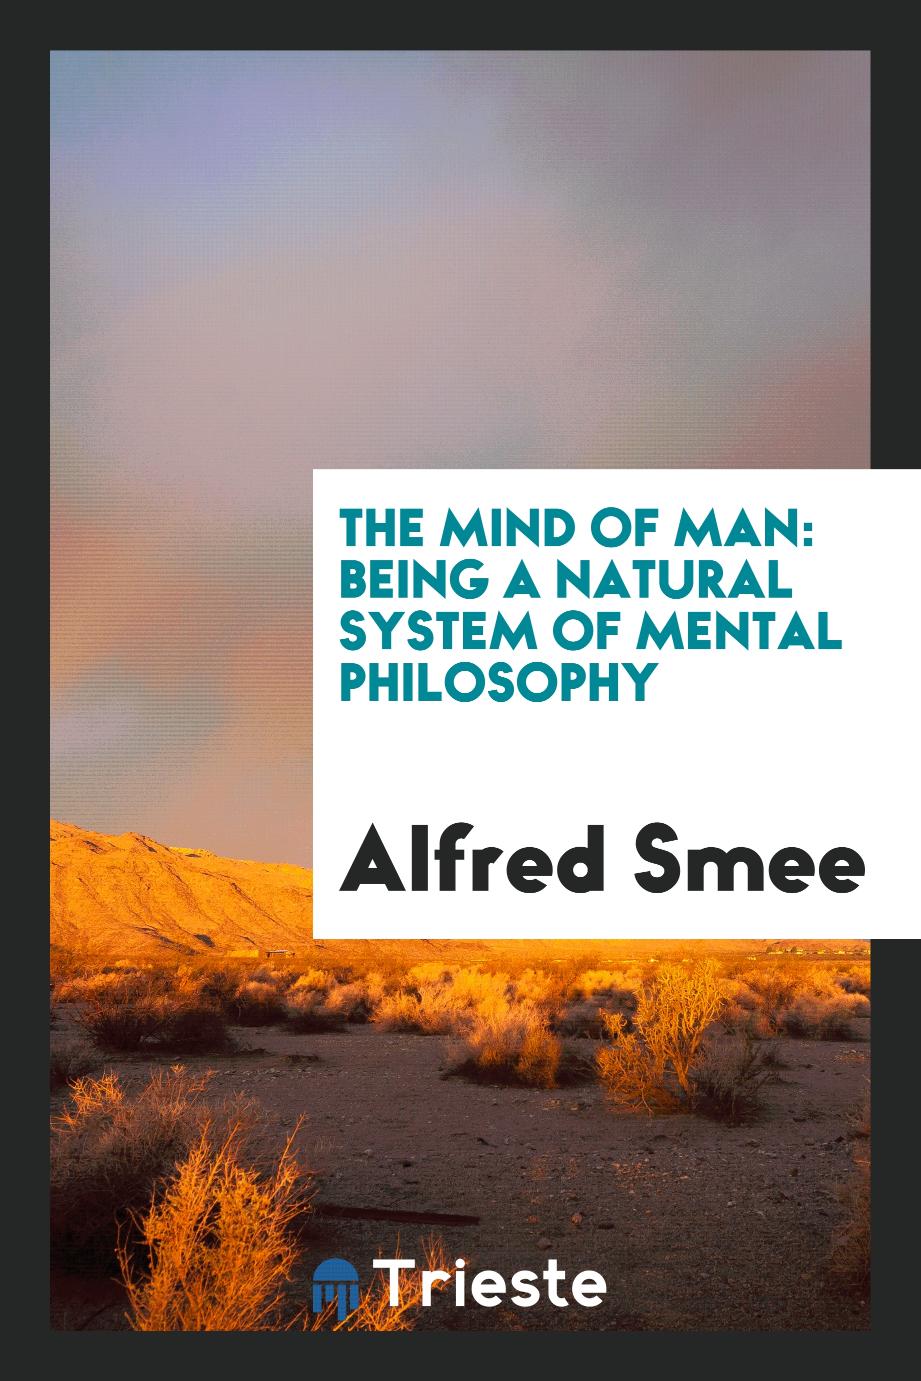 The Mind of Man: Being a Natural System of Mental Philosophy